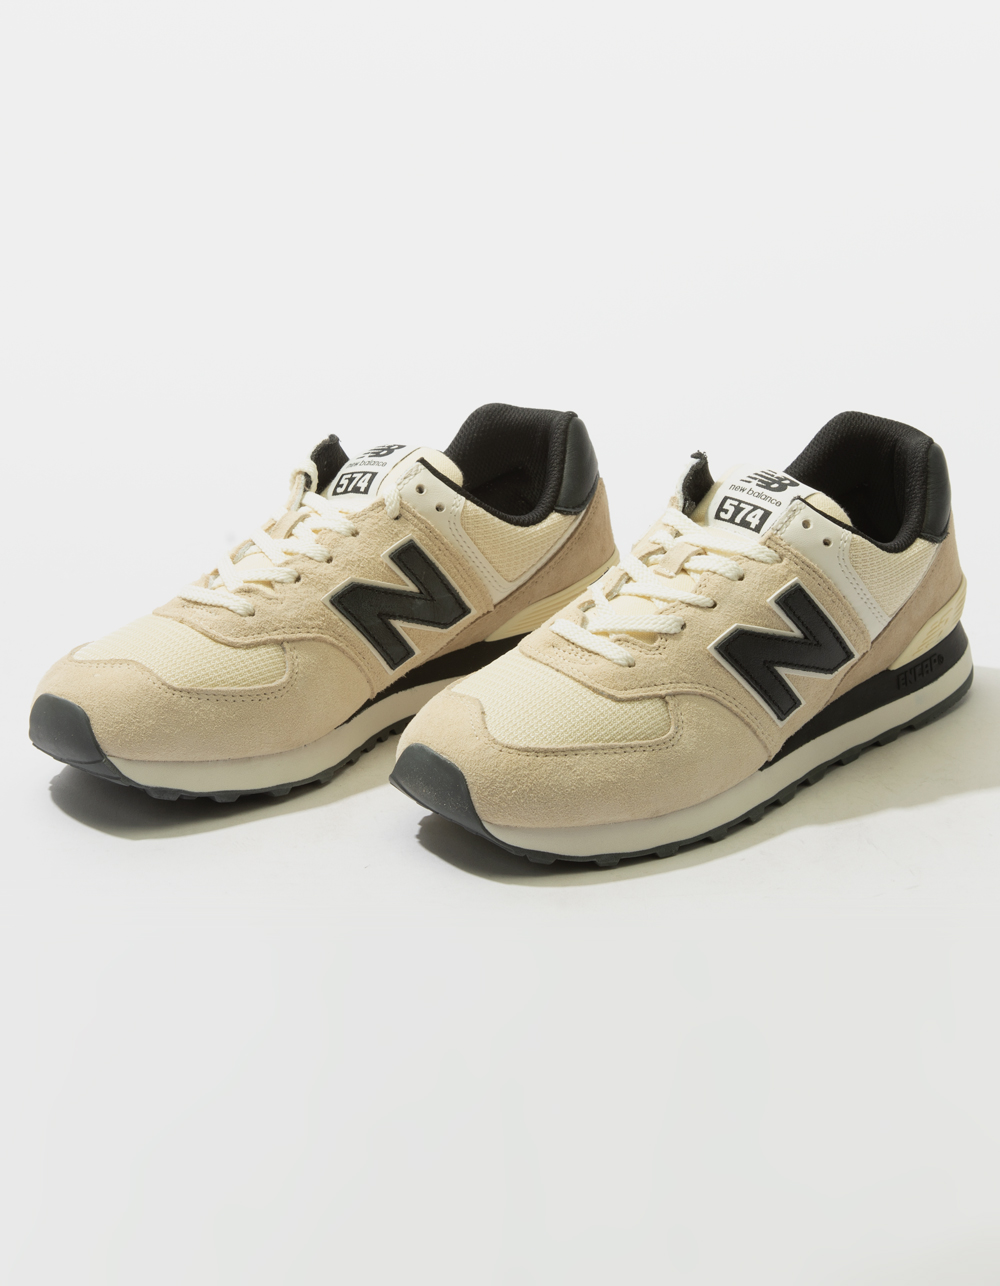 insecto Arábica Notable NEW BALANCE 574 V2 Mens Shoes - BLACK COMBO | Tillys